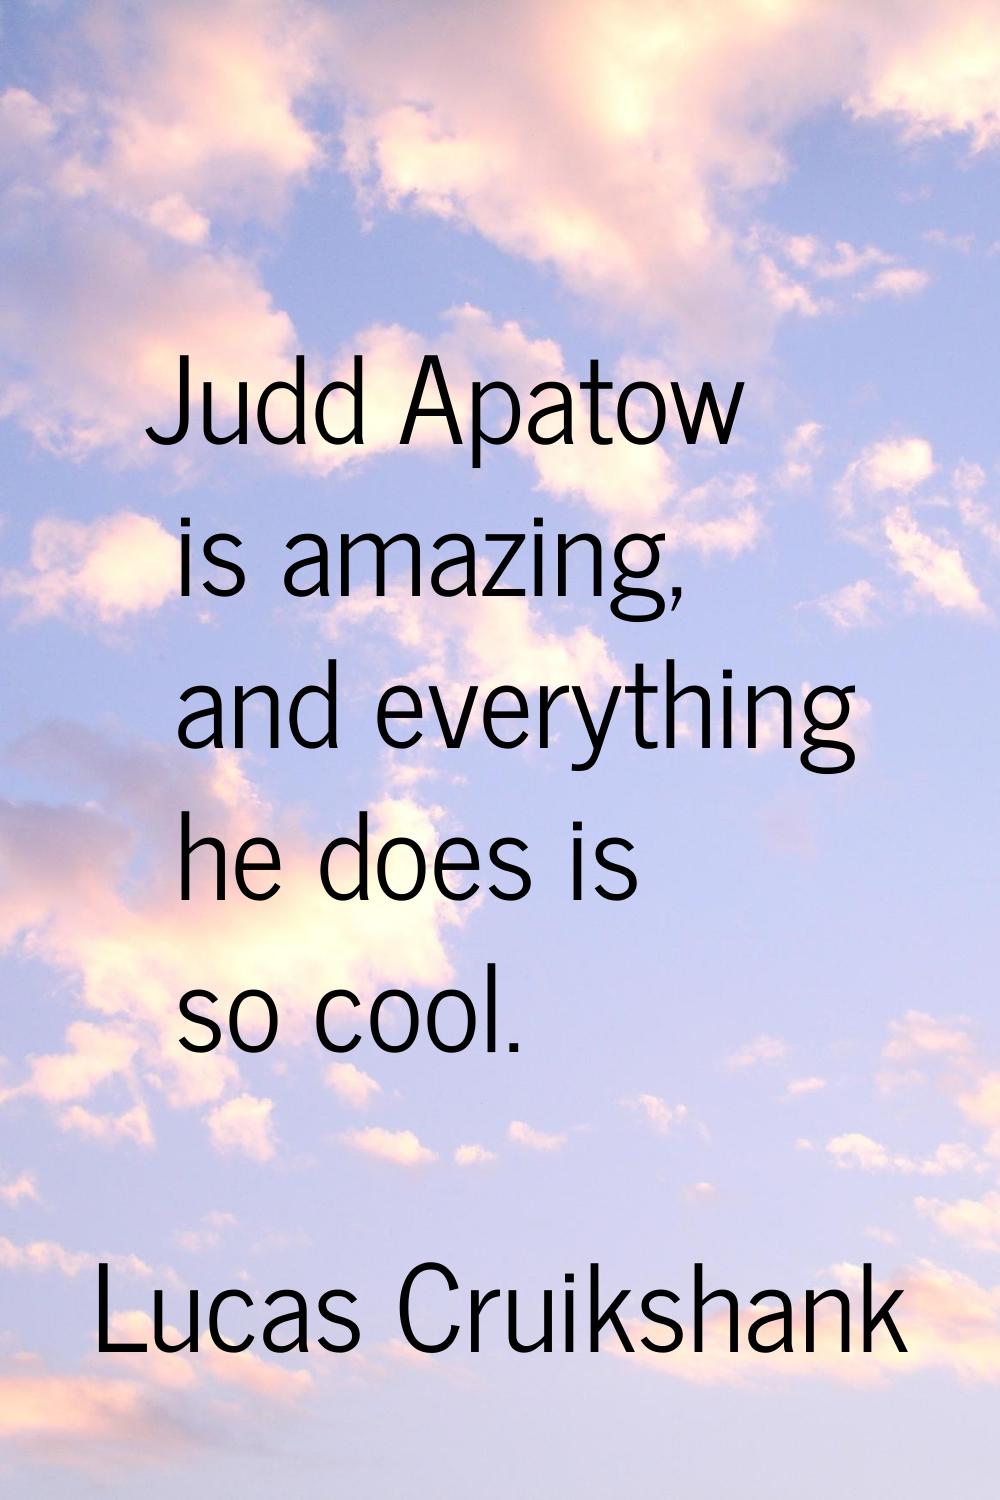 Judd Apatow is amazing, and everything he does is so cool.